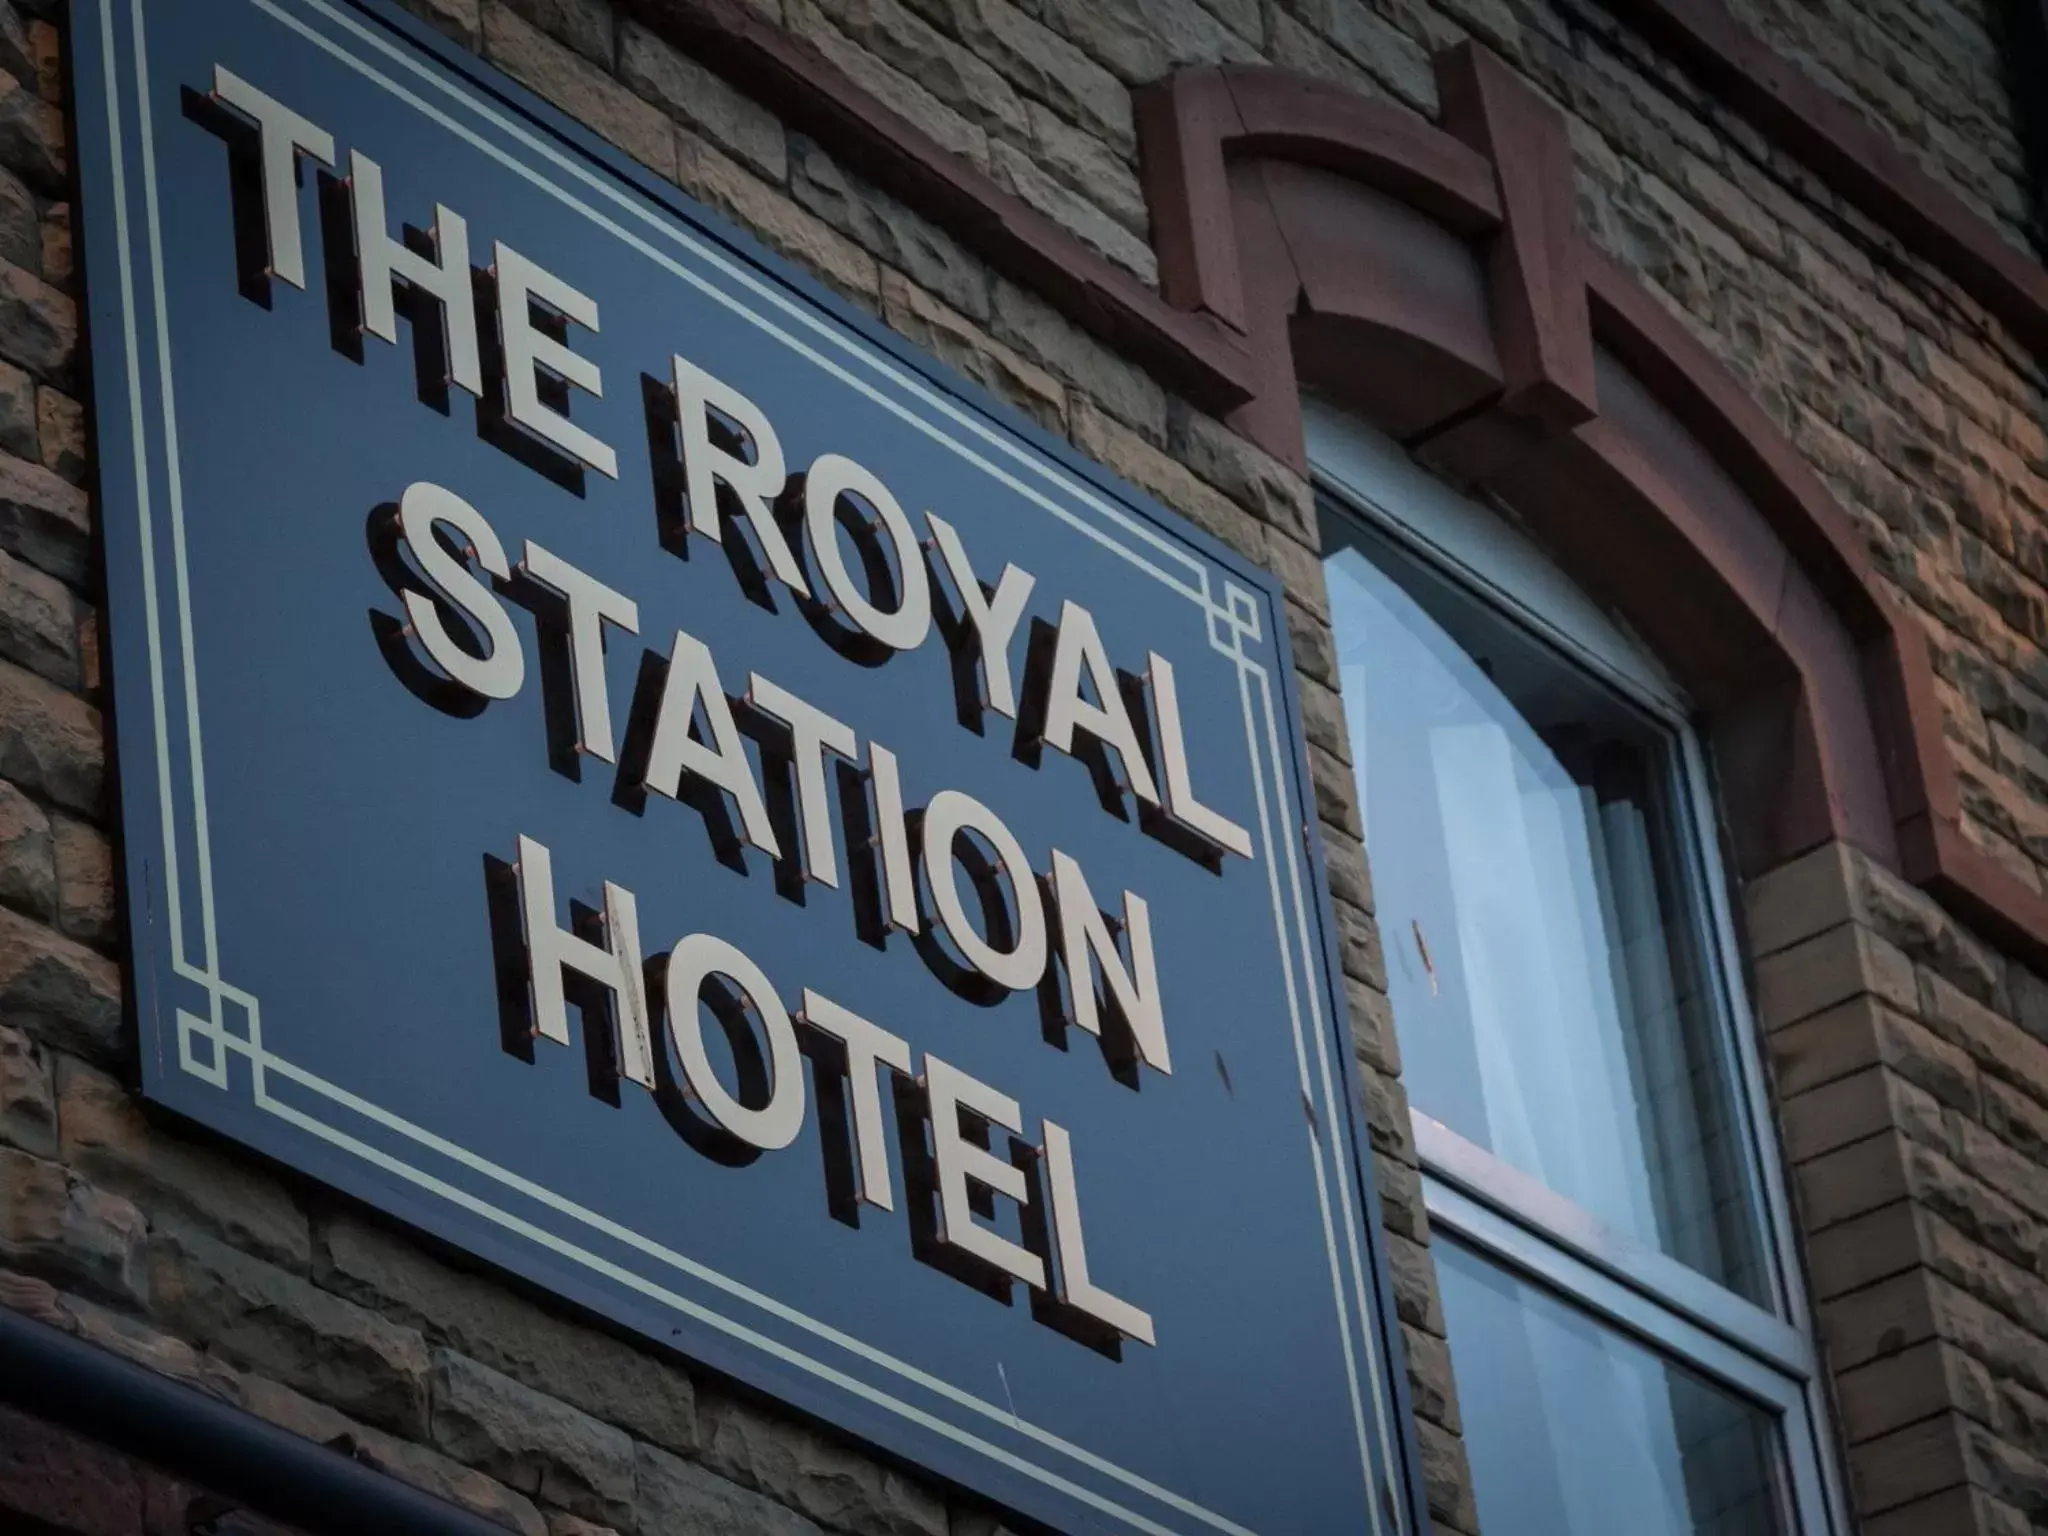 Facade/entrance in The Royal Station Hotel